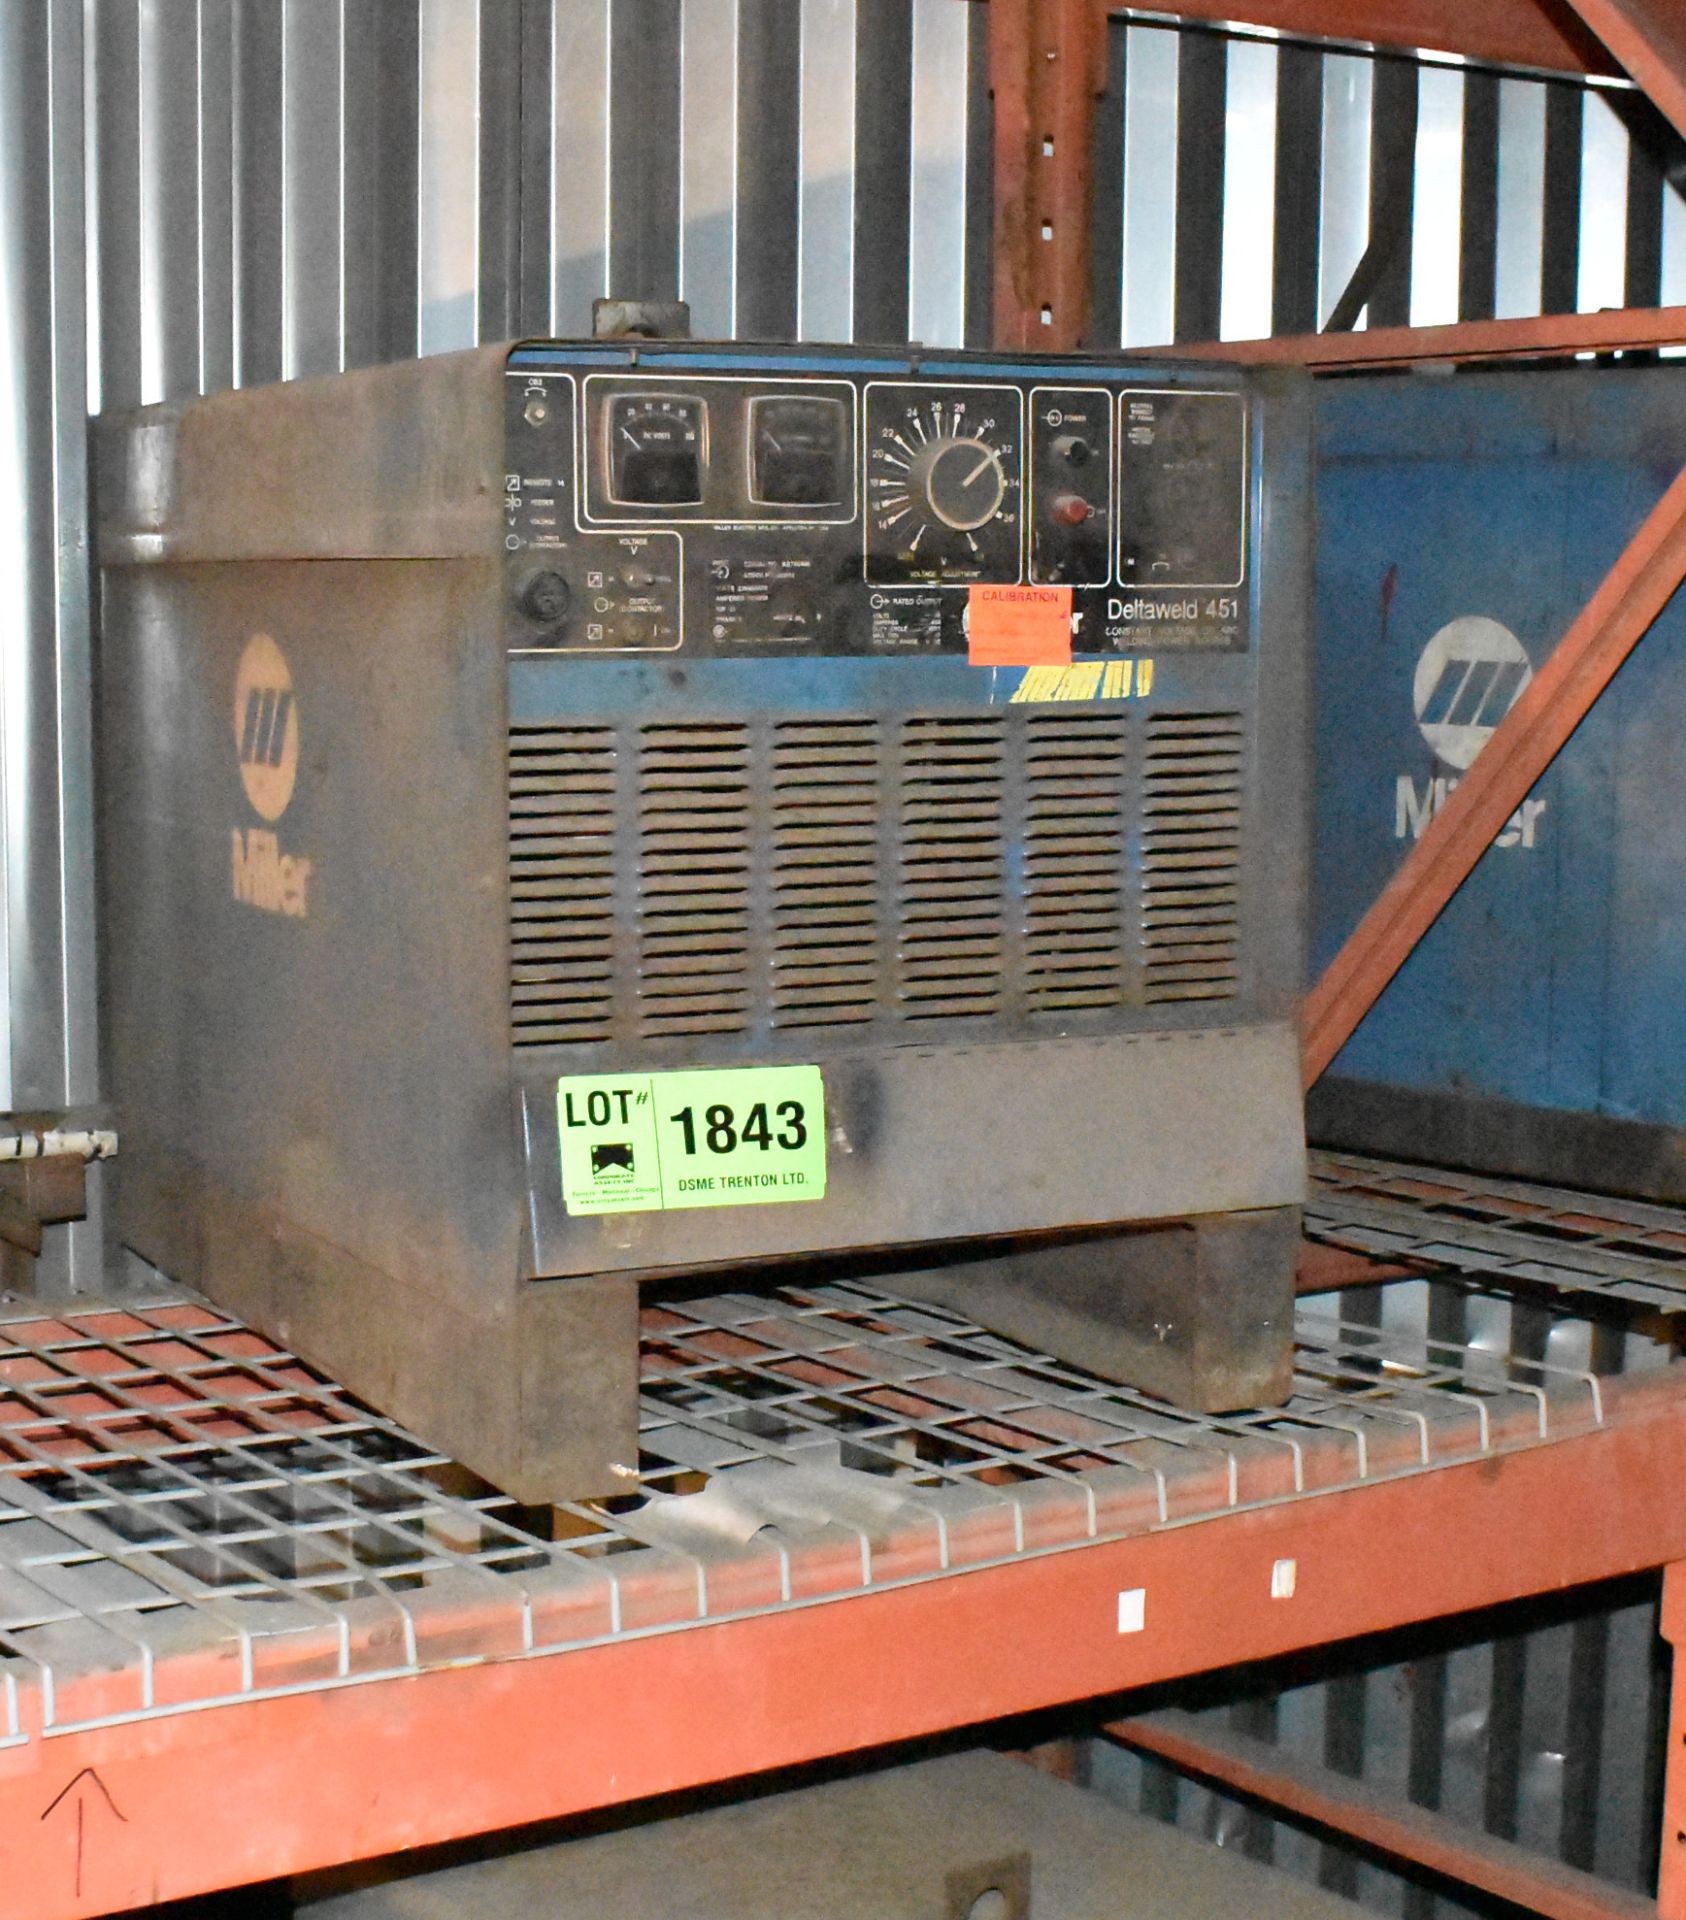 MILLER DELTAWELD 451 WELDING POWER SOURCE [RIGGING FEE FOR LOT# 1843 - $40 USD +PLUS TAXES]